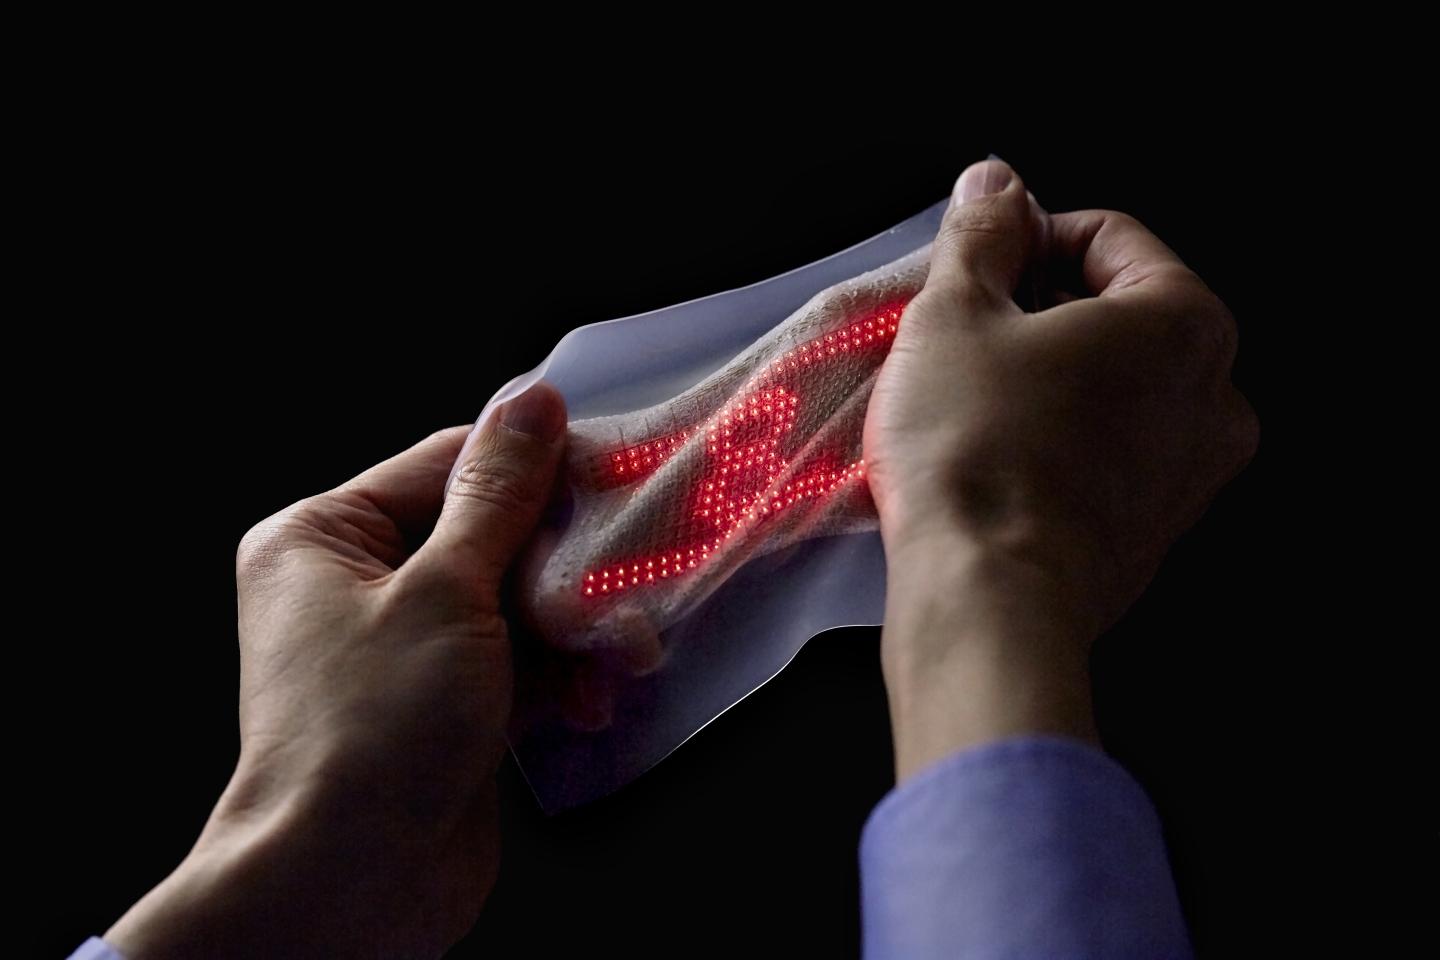 Ultrathin Deformable Skin Display Withstands Stretching